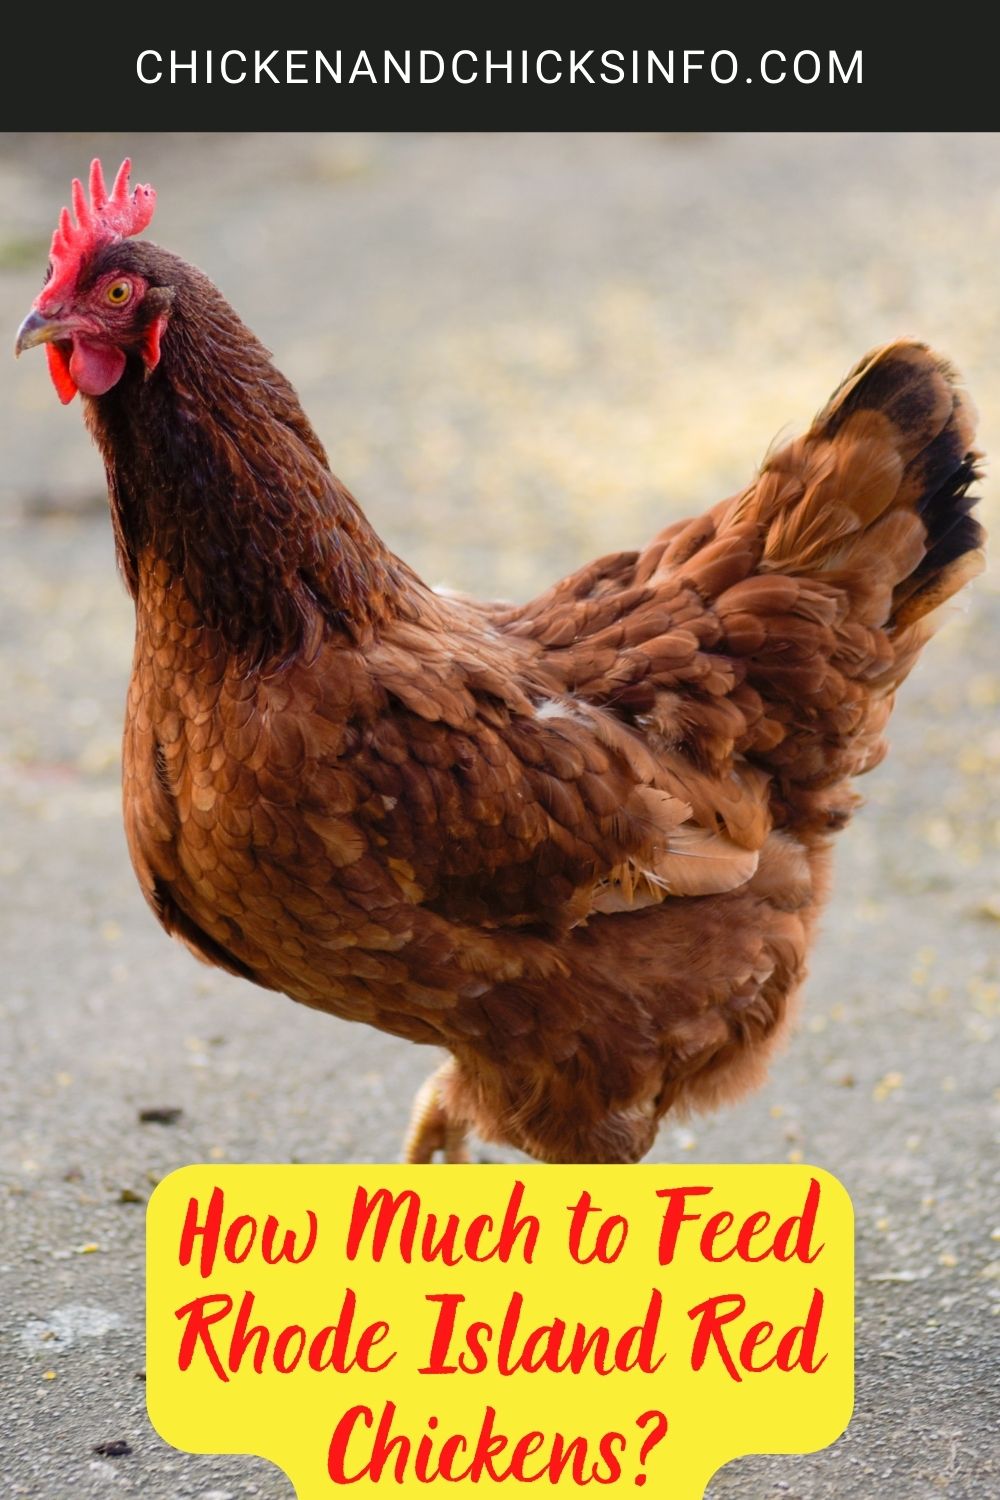 How Much to Feed Rhode Island Red Chickens? poster.
